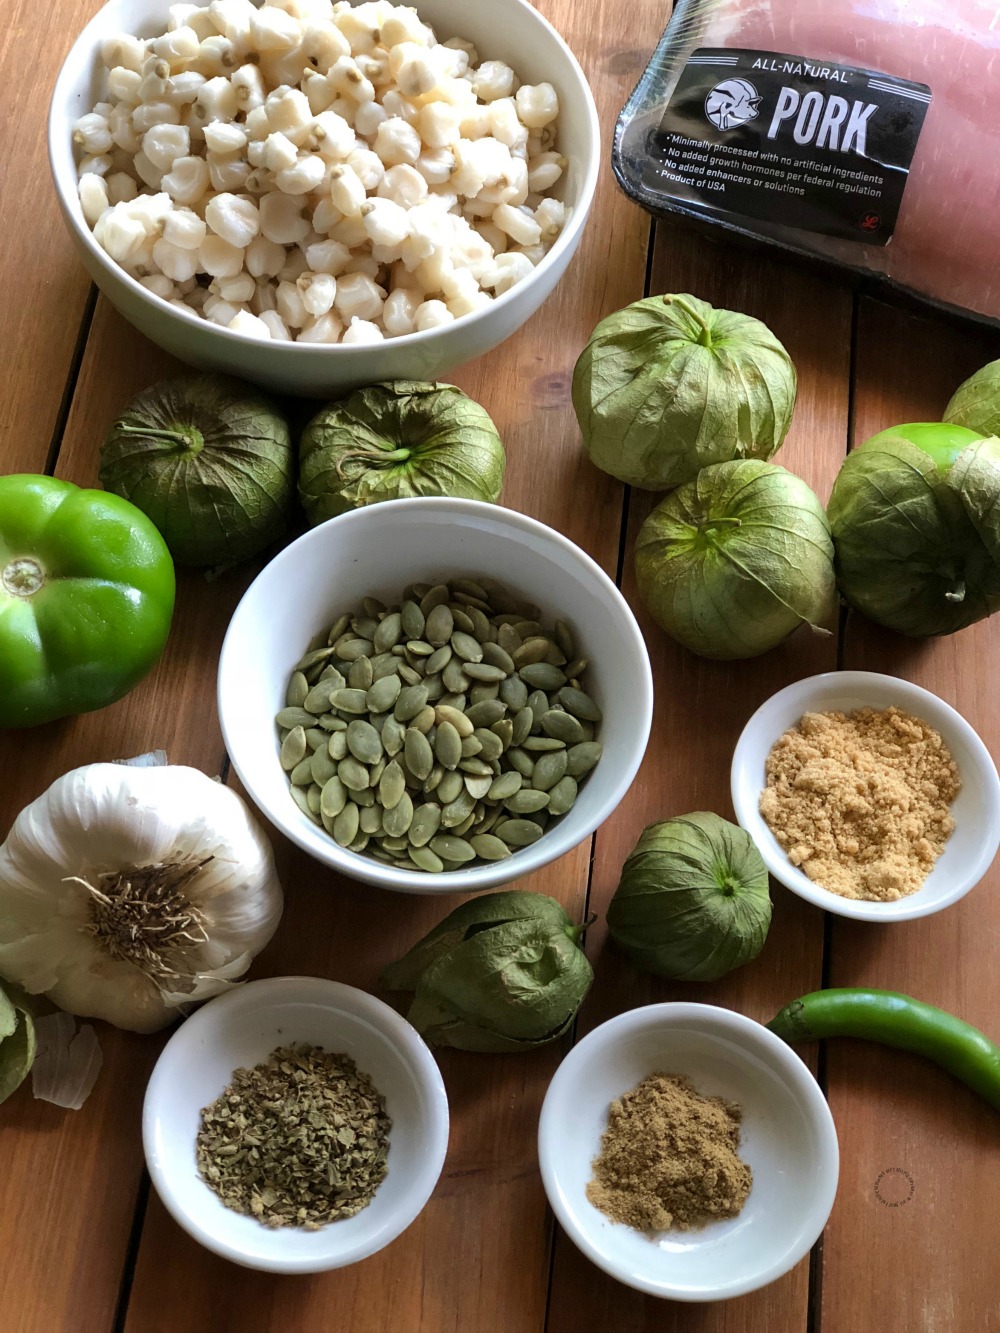 Ingredients for the Instant Pot Green Pork Pozole Recipe